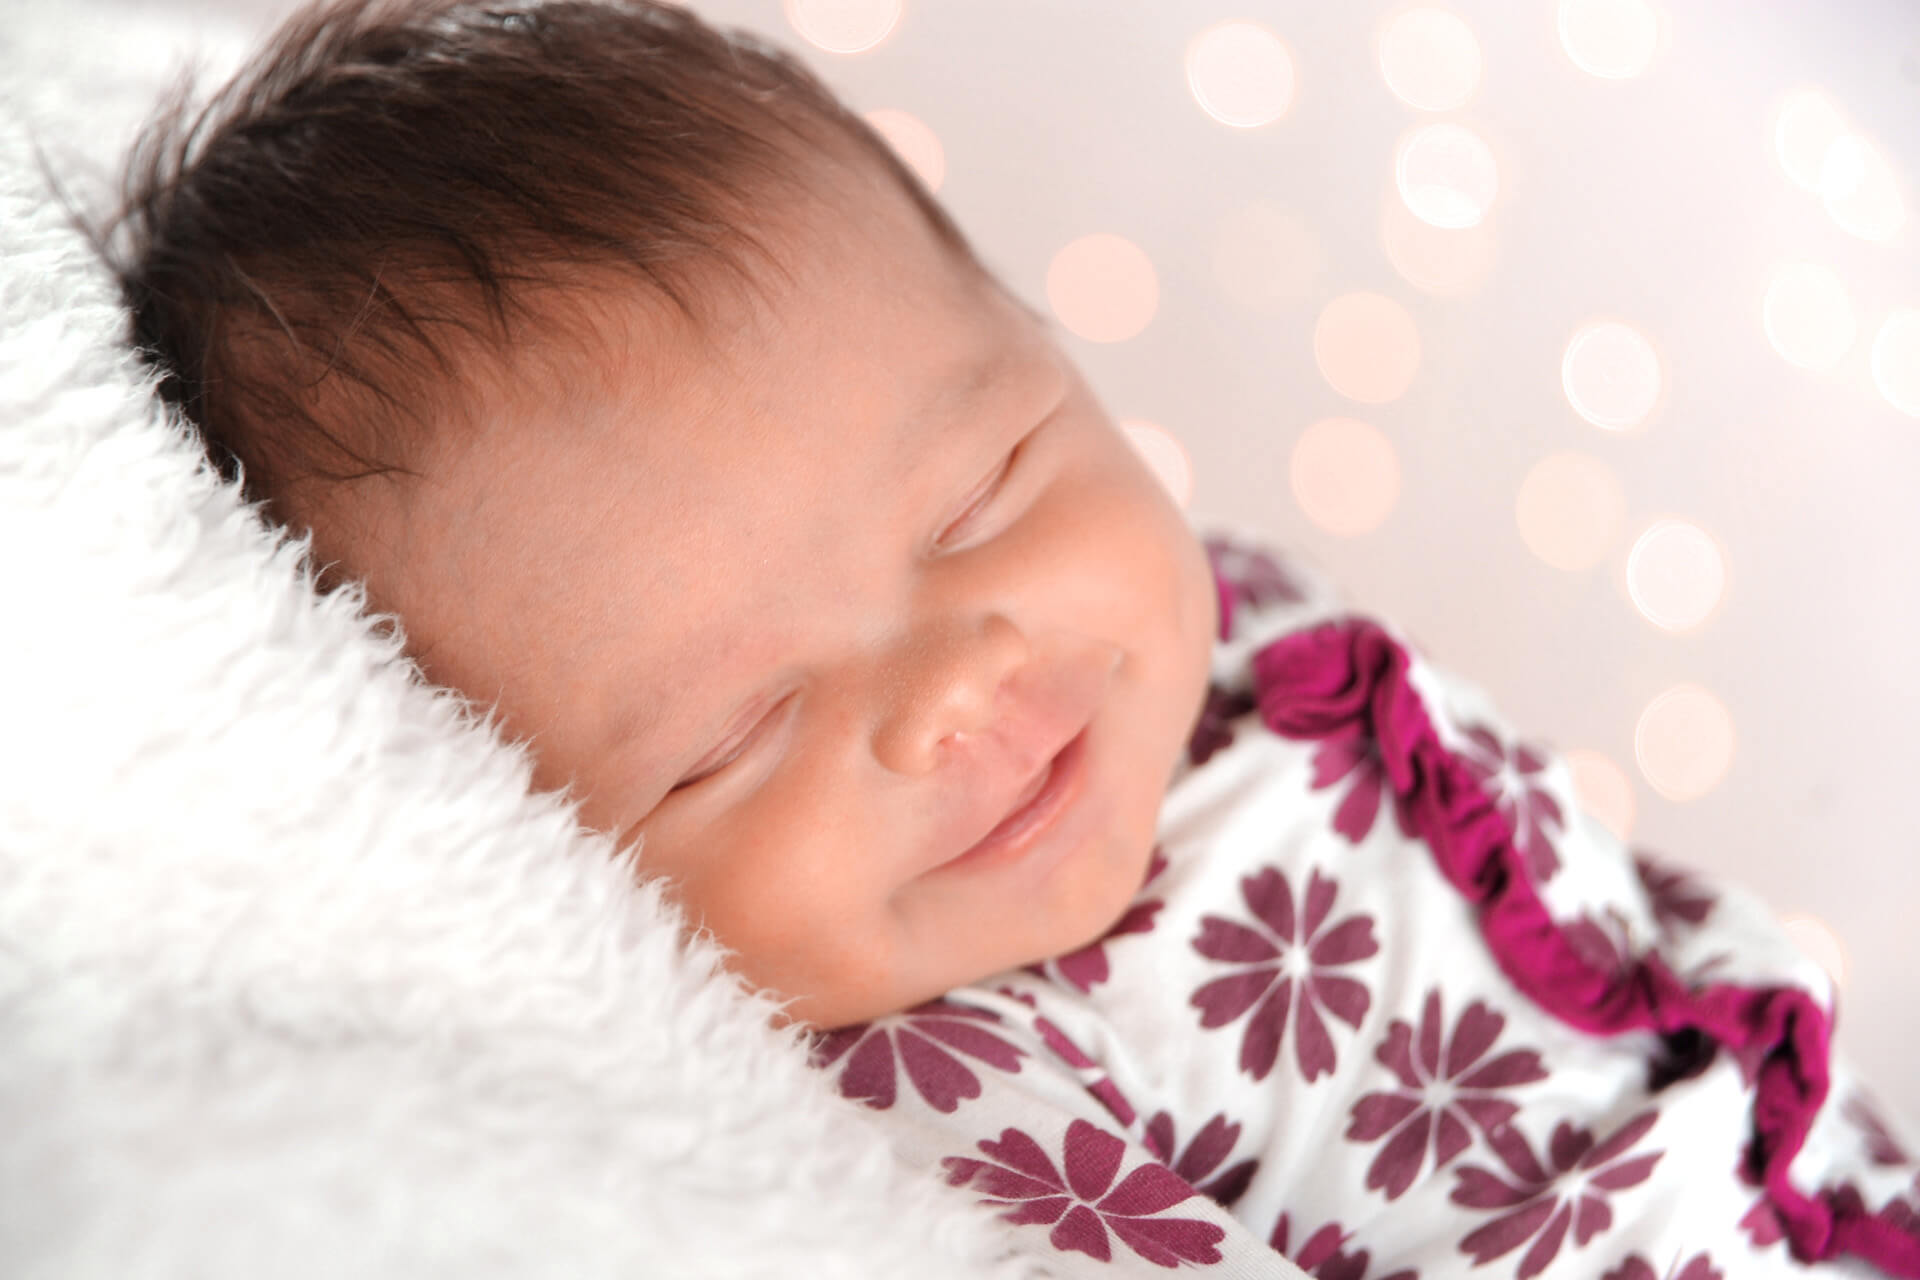 Best Detroit baby photographer is happy to photograph infants smiling in their sleep during their photography sessions in metro Detroit, Michigan.